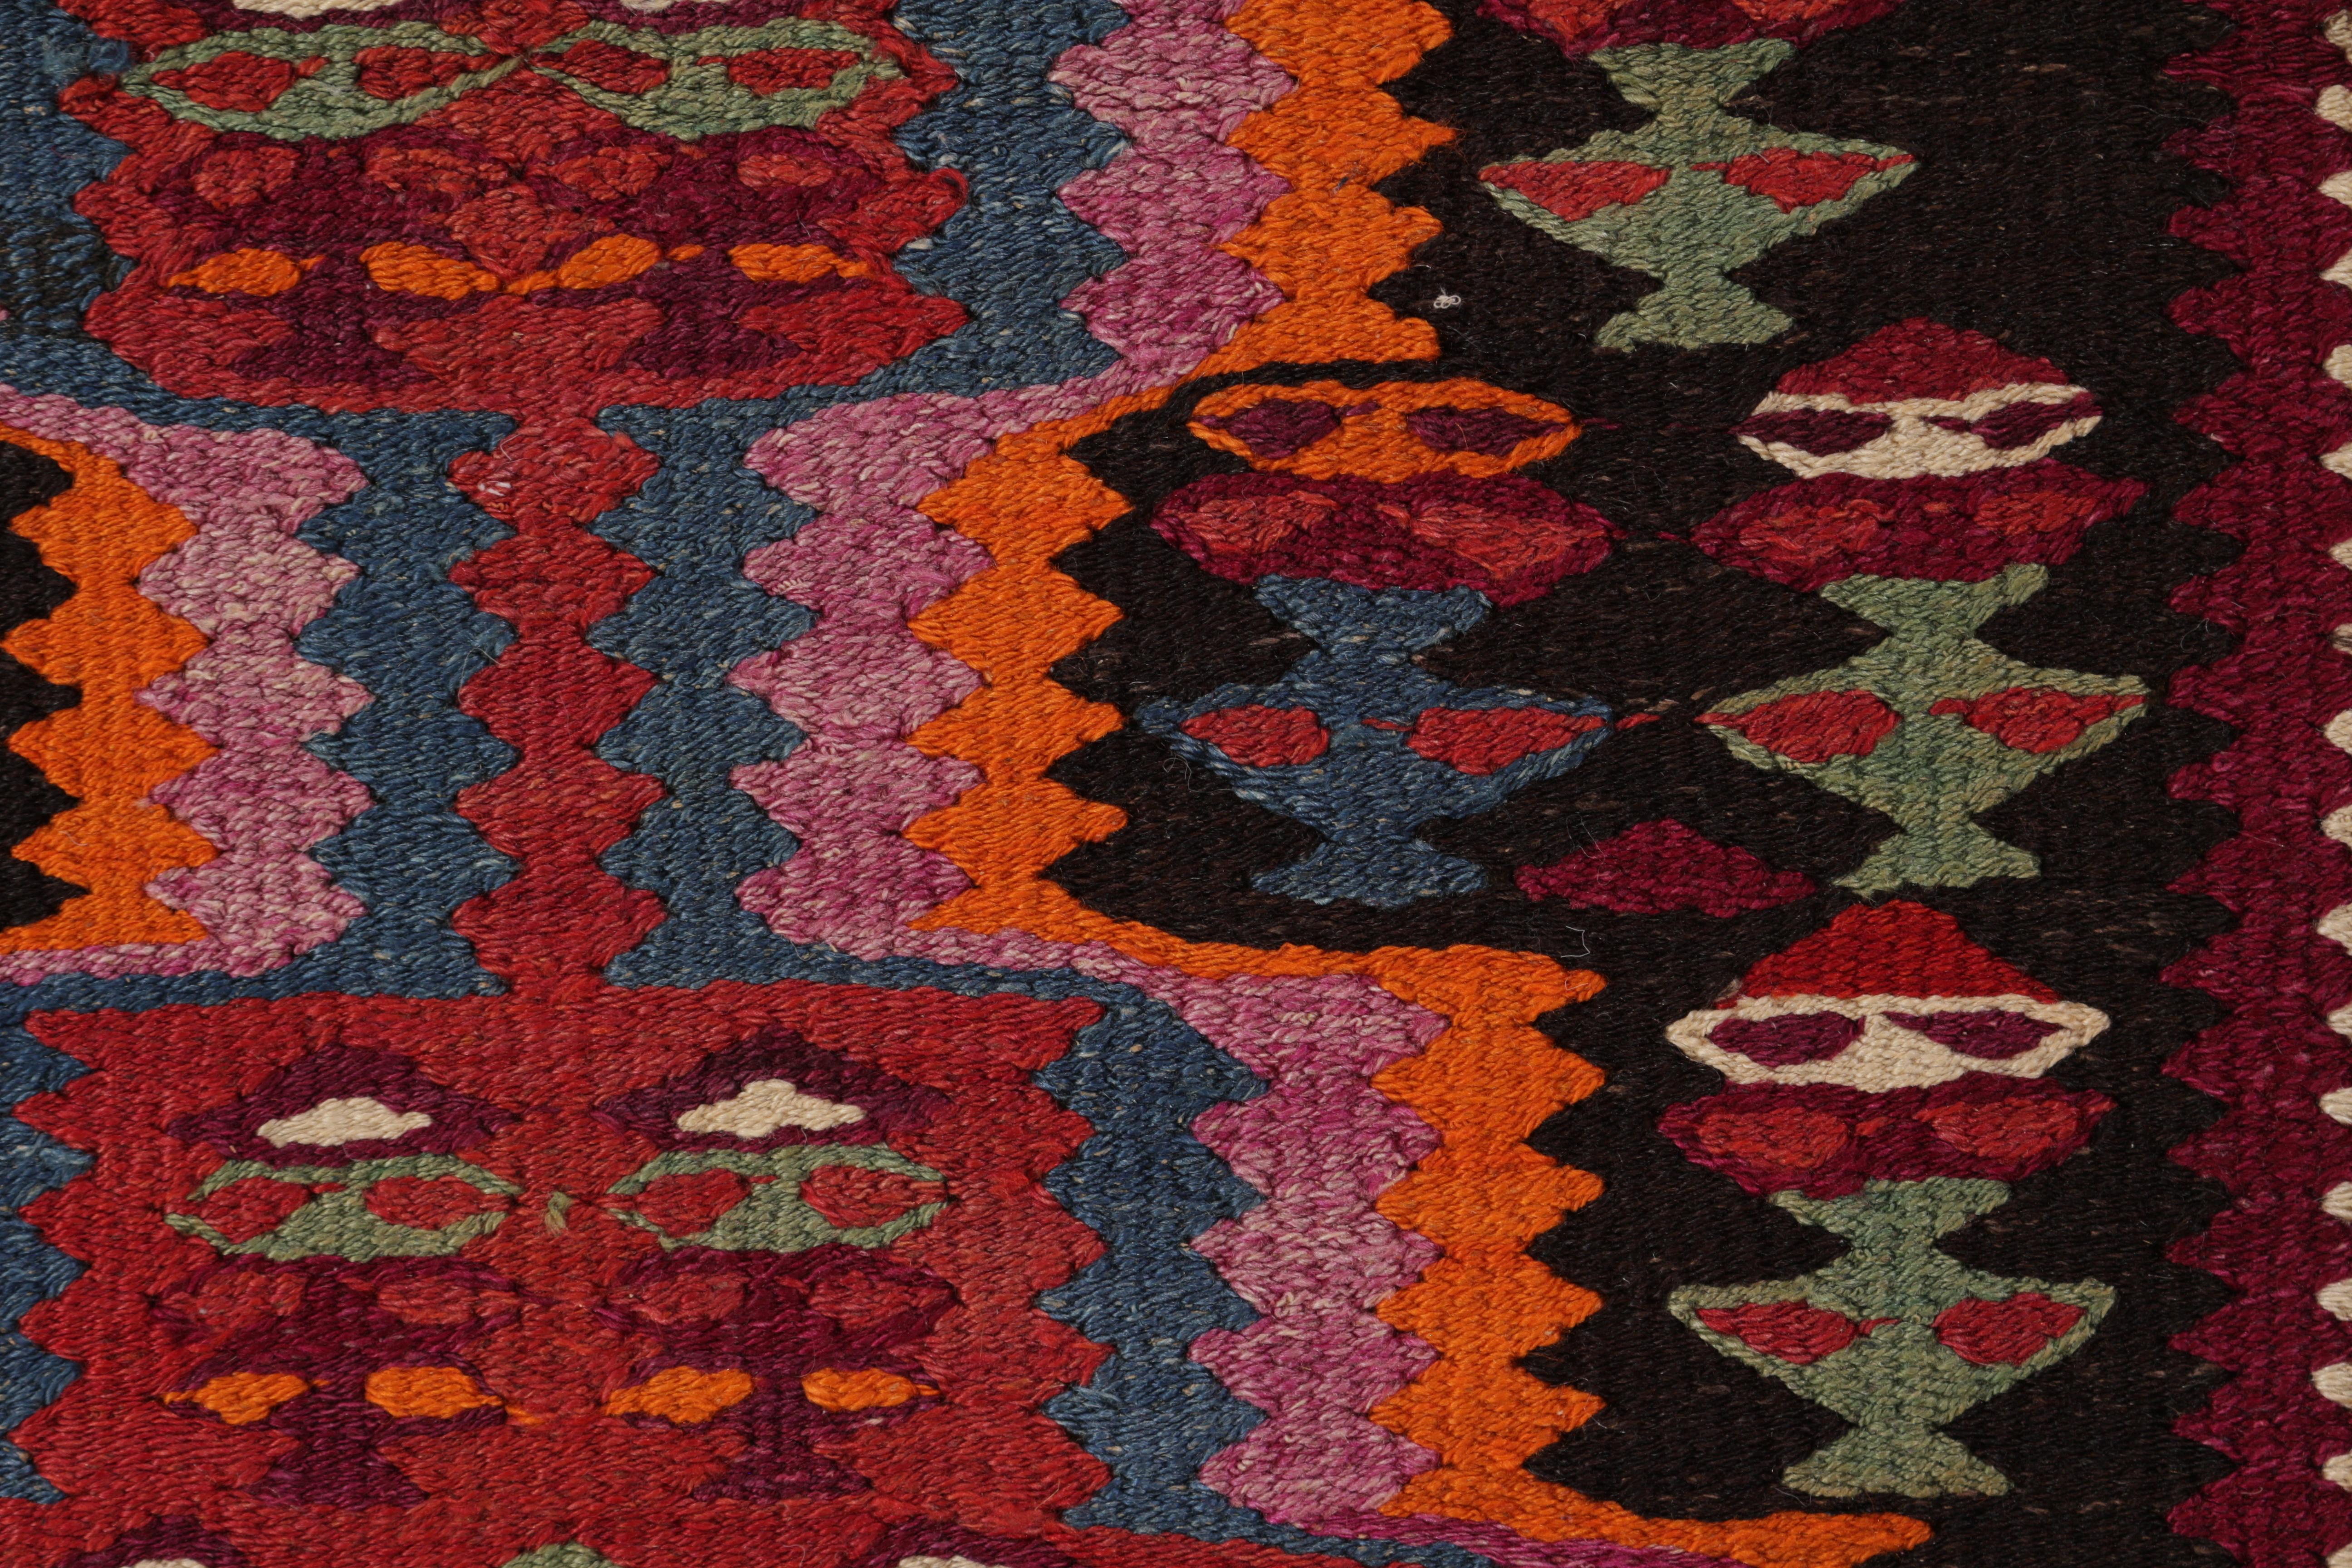 Handmade in a particularly full, durable flat-woven wool circa 1950-1960, this vintage Persian Kilim originates from the Harsin region of midcentury Kermanshah Kilim design, the period and locale remarking the superb quality and equally meticulous